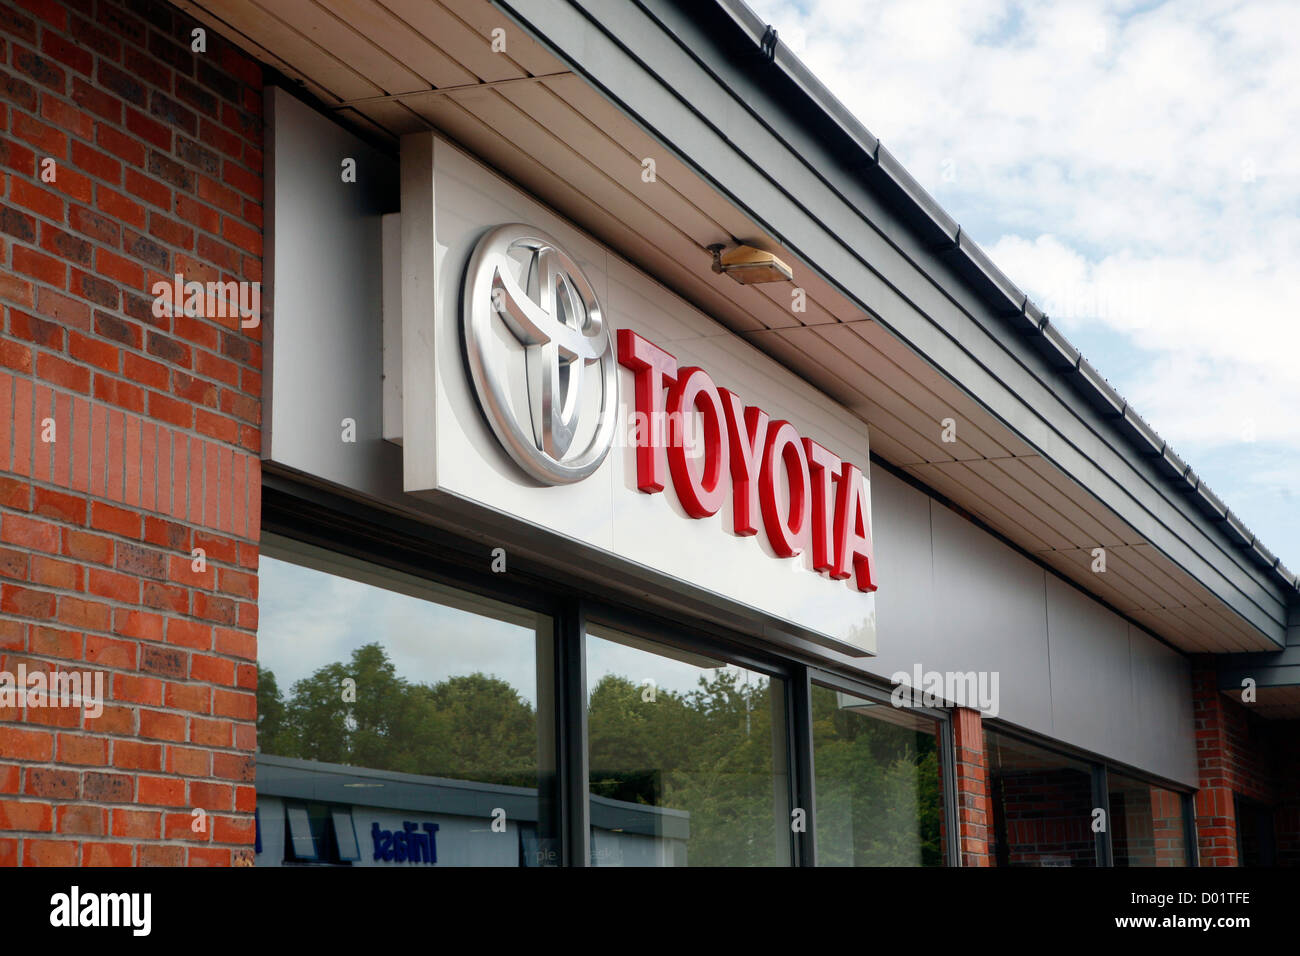 A big Toyota logo on the side of a Toyota car dealership. Stock Photo